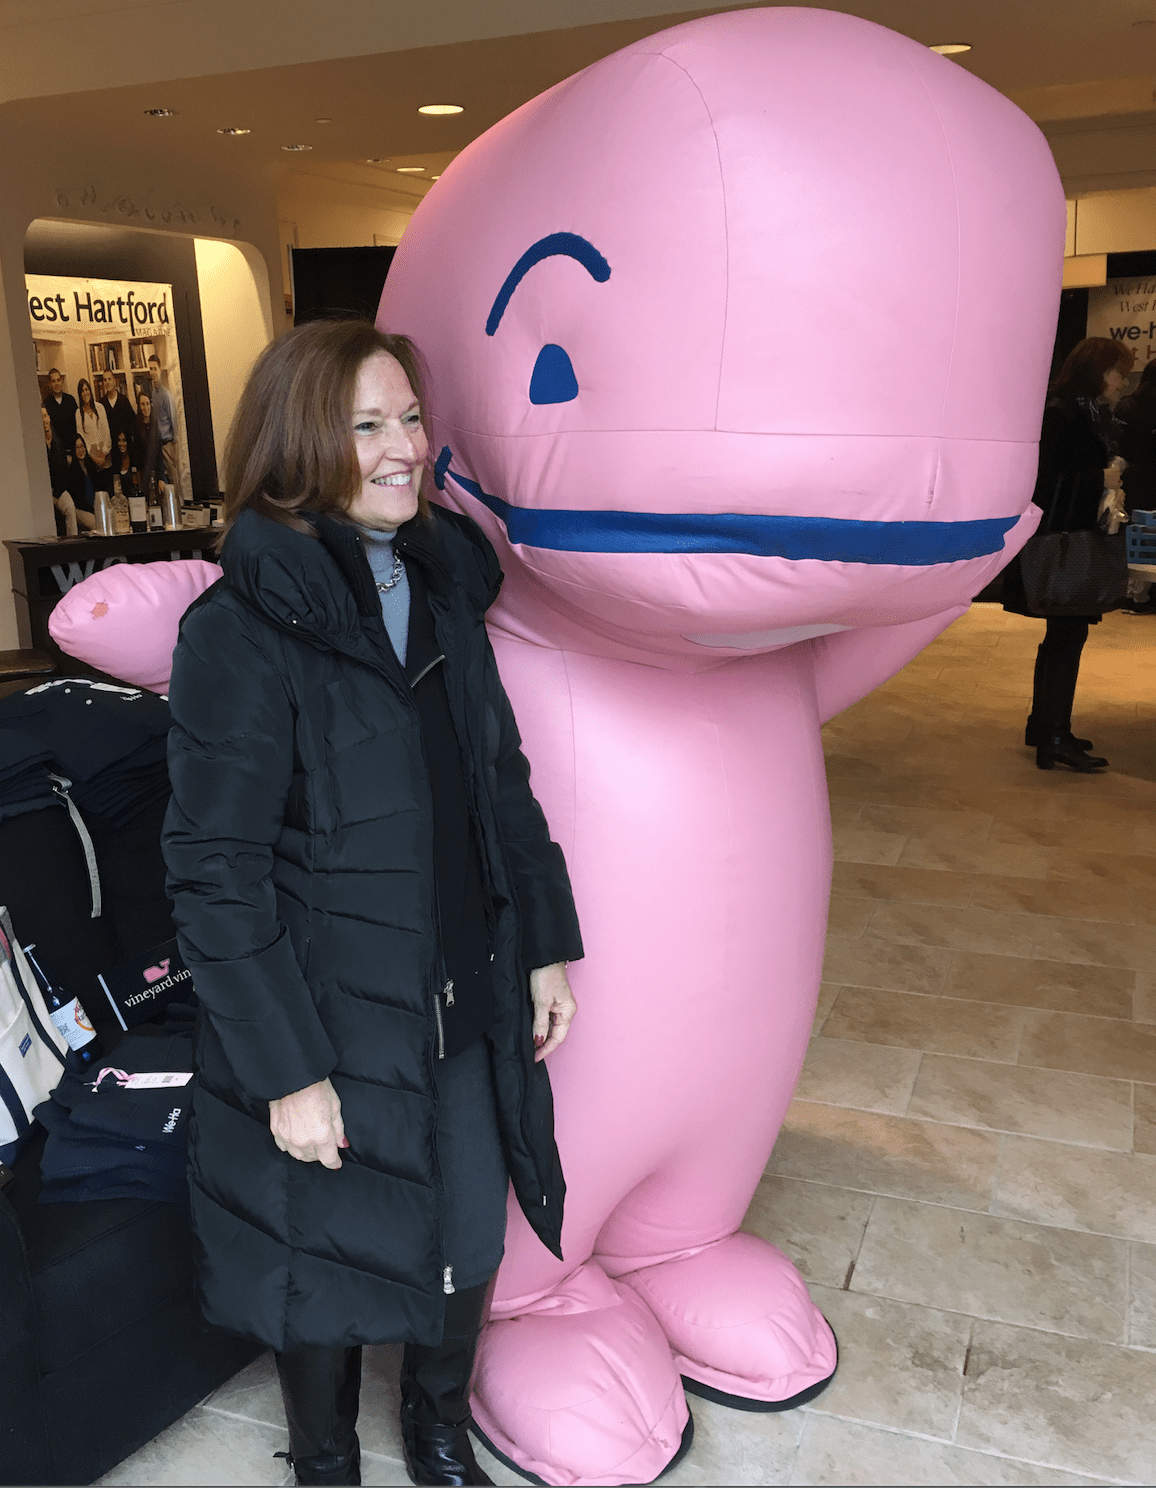 West Hartford Chamber of Commerce Executive Director Barbara Lerner with the Vineyard Vines Whale Mascot at the We-Ha Pop-Up Store in Blue Back Square. Photo credit: Joy Taylor